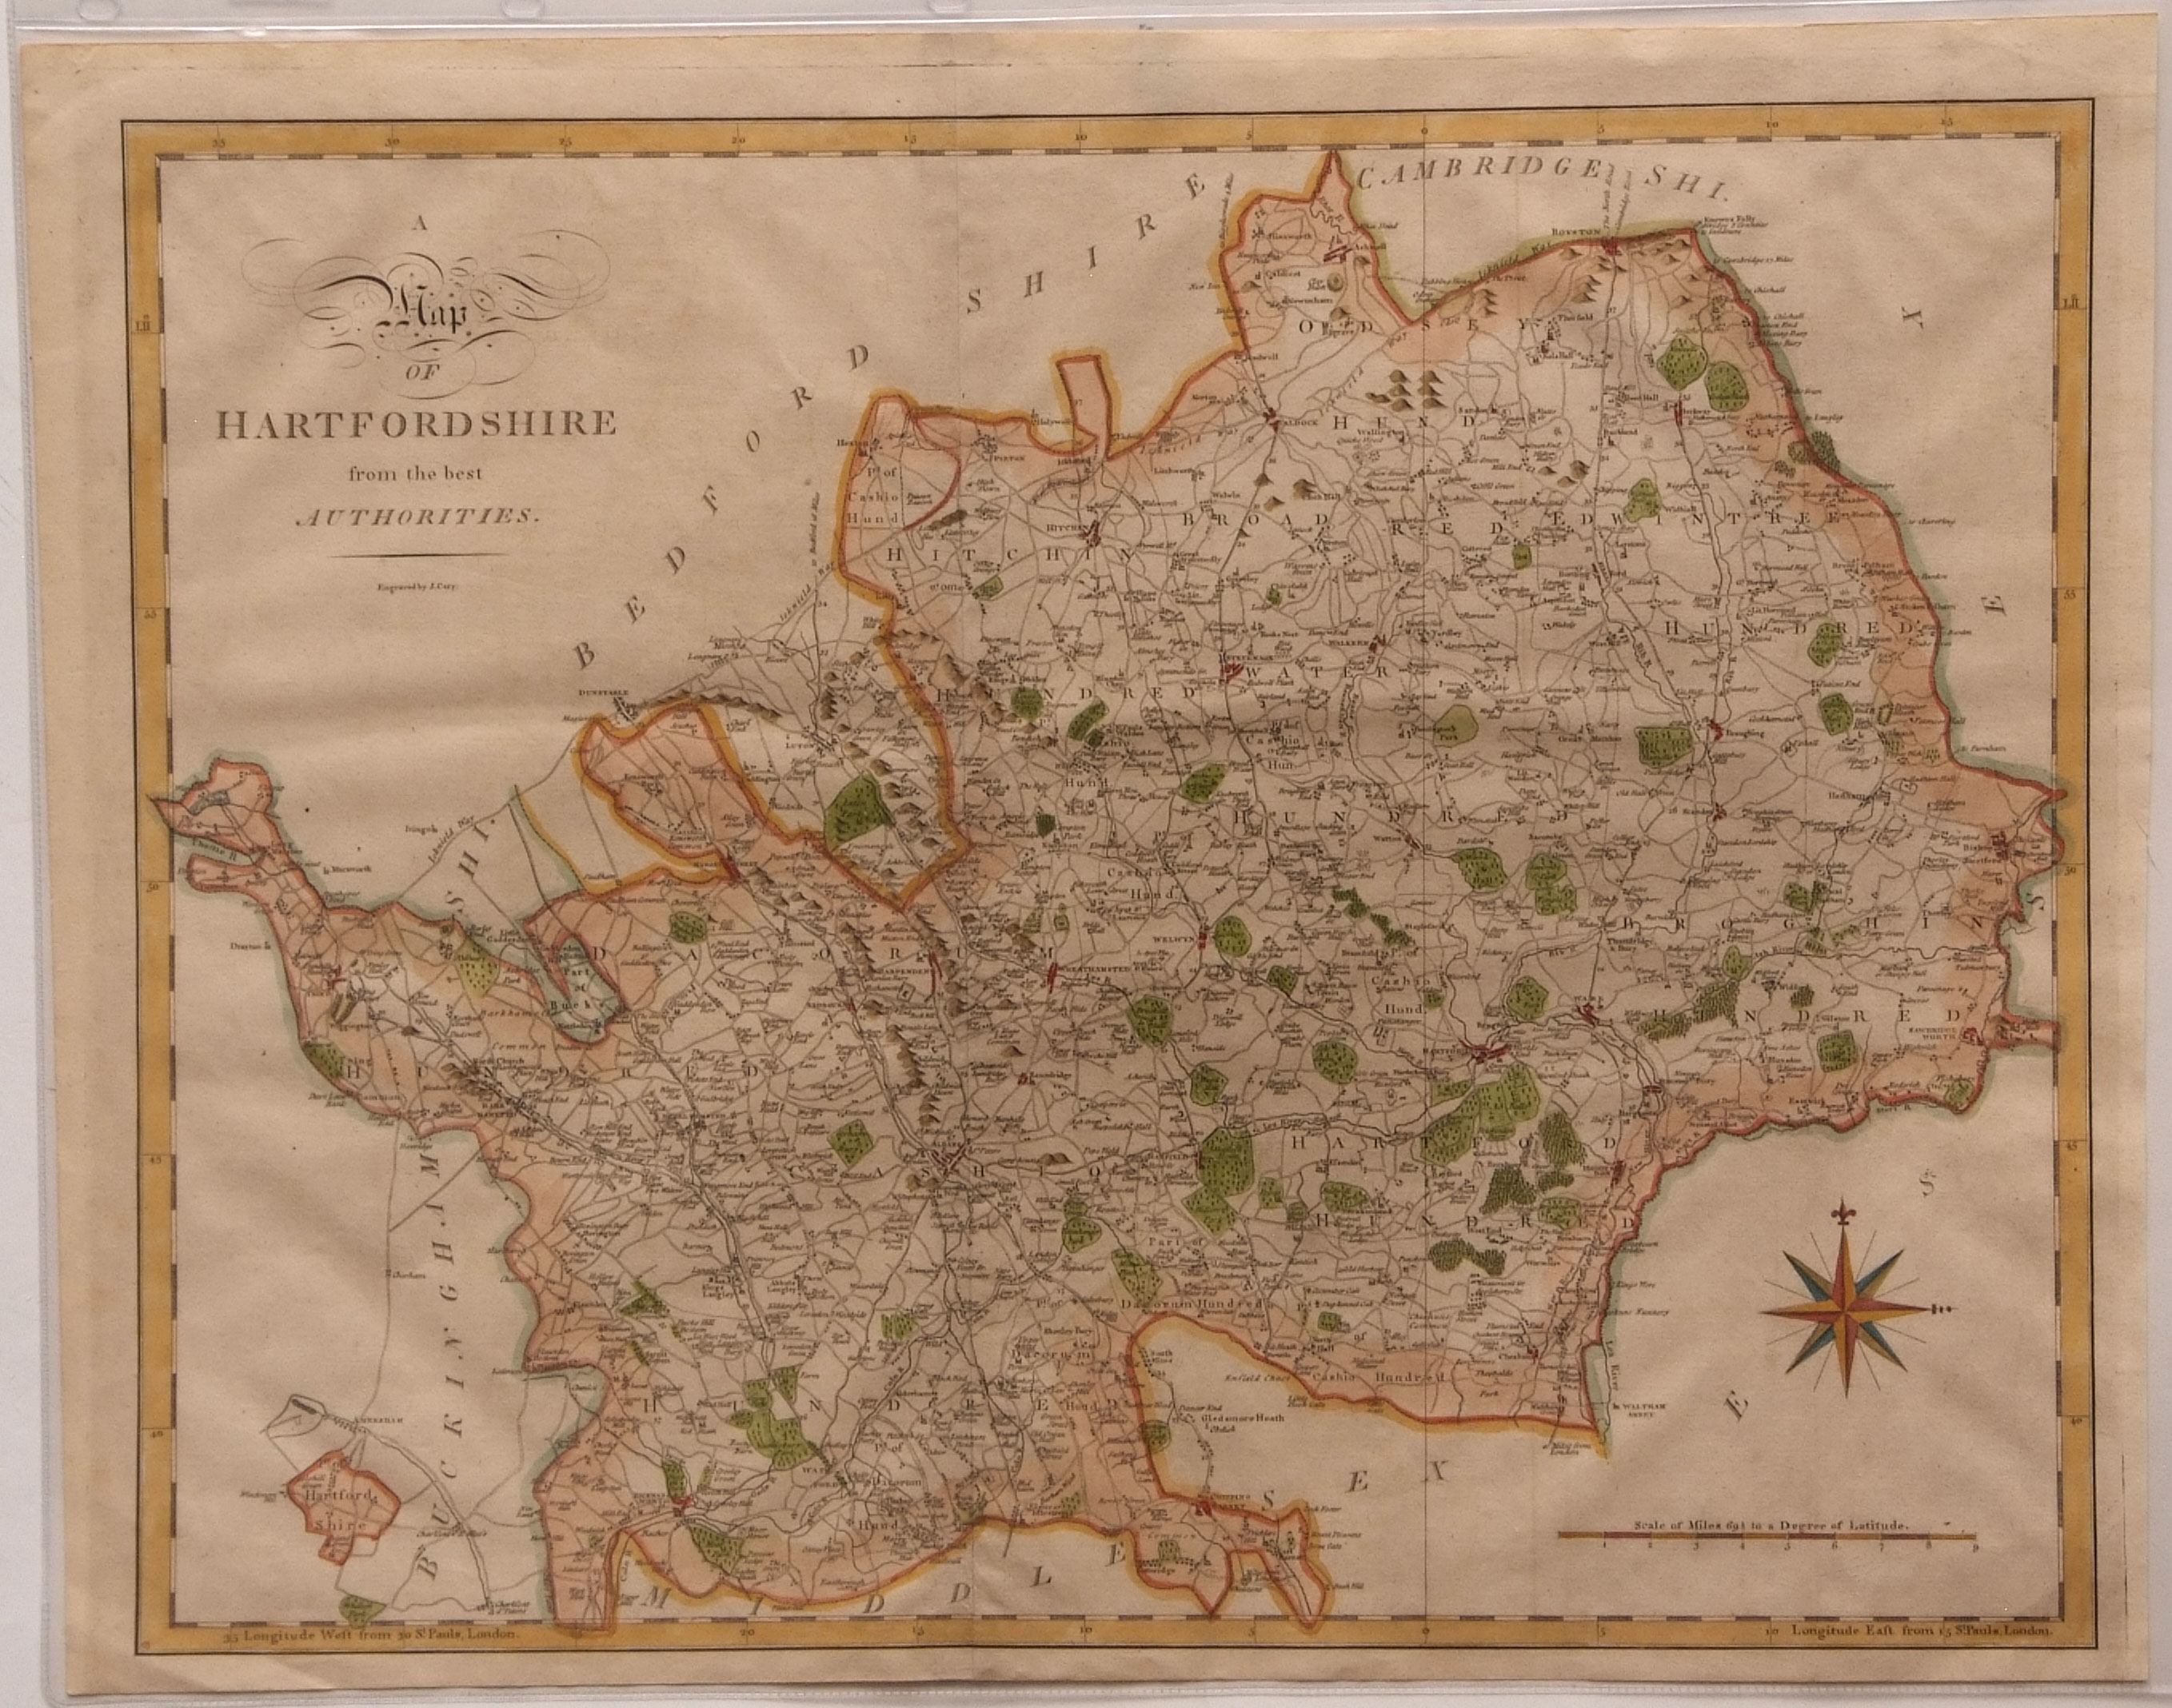 JOHN CARY: A MAP OF HARTFORDSHIRE [HERTFORDSHIRE] FROM THE BEST AUTHORITIES, engraved hand